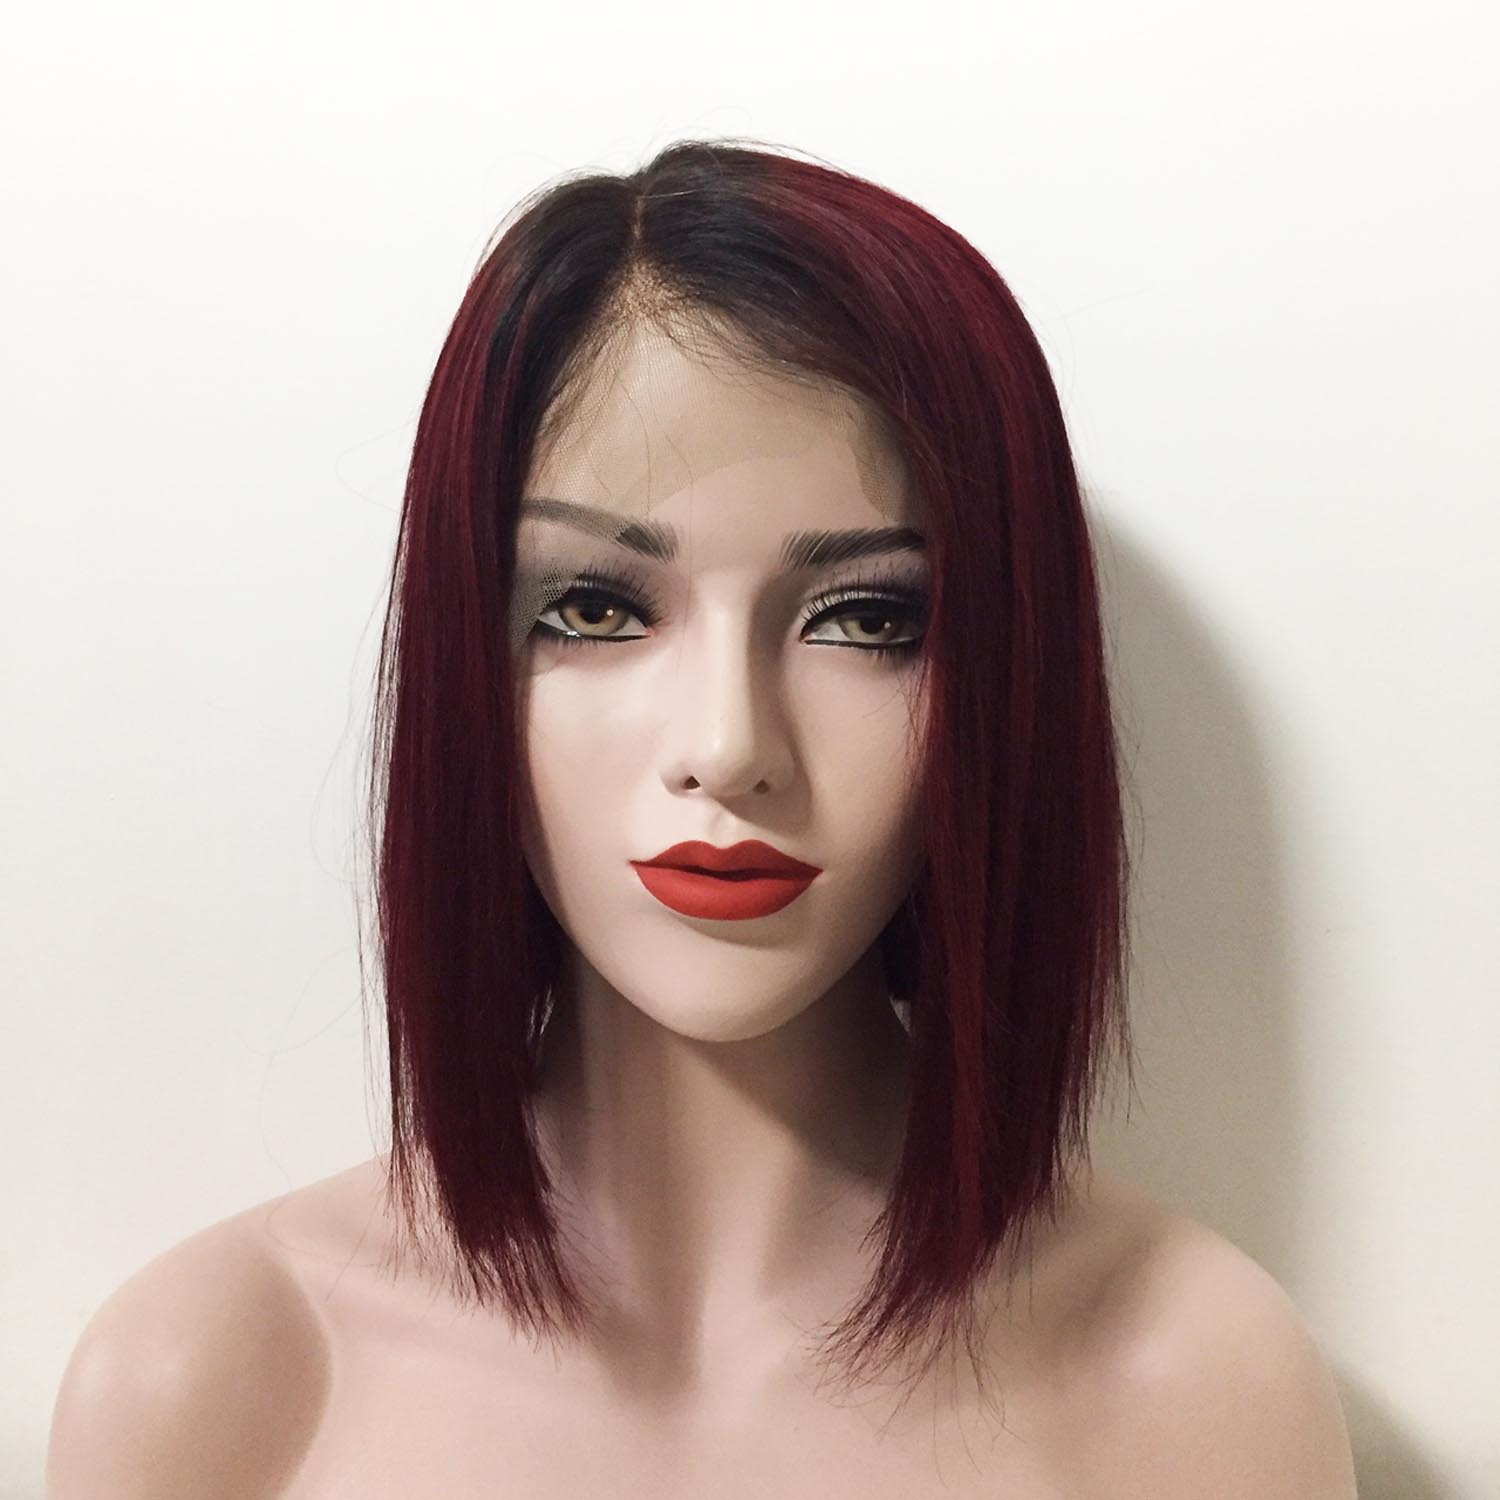 nevermindyrhead Women Dark Red Ombre Human Hair Lace Front Short Straight Wig